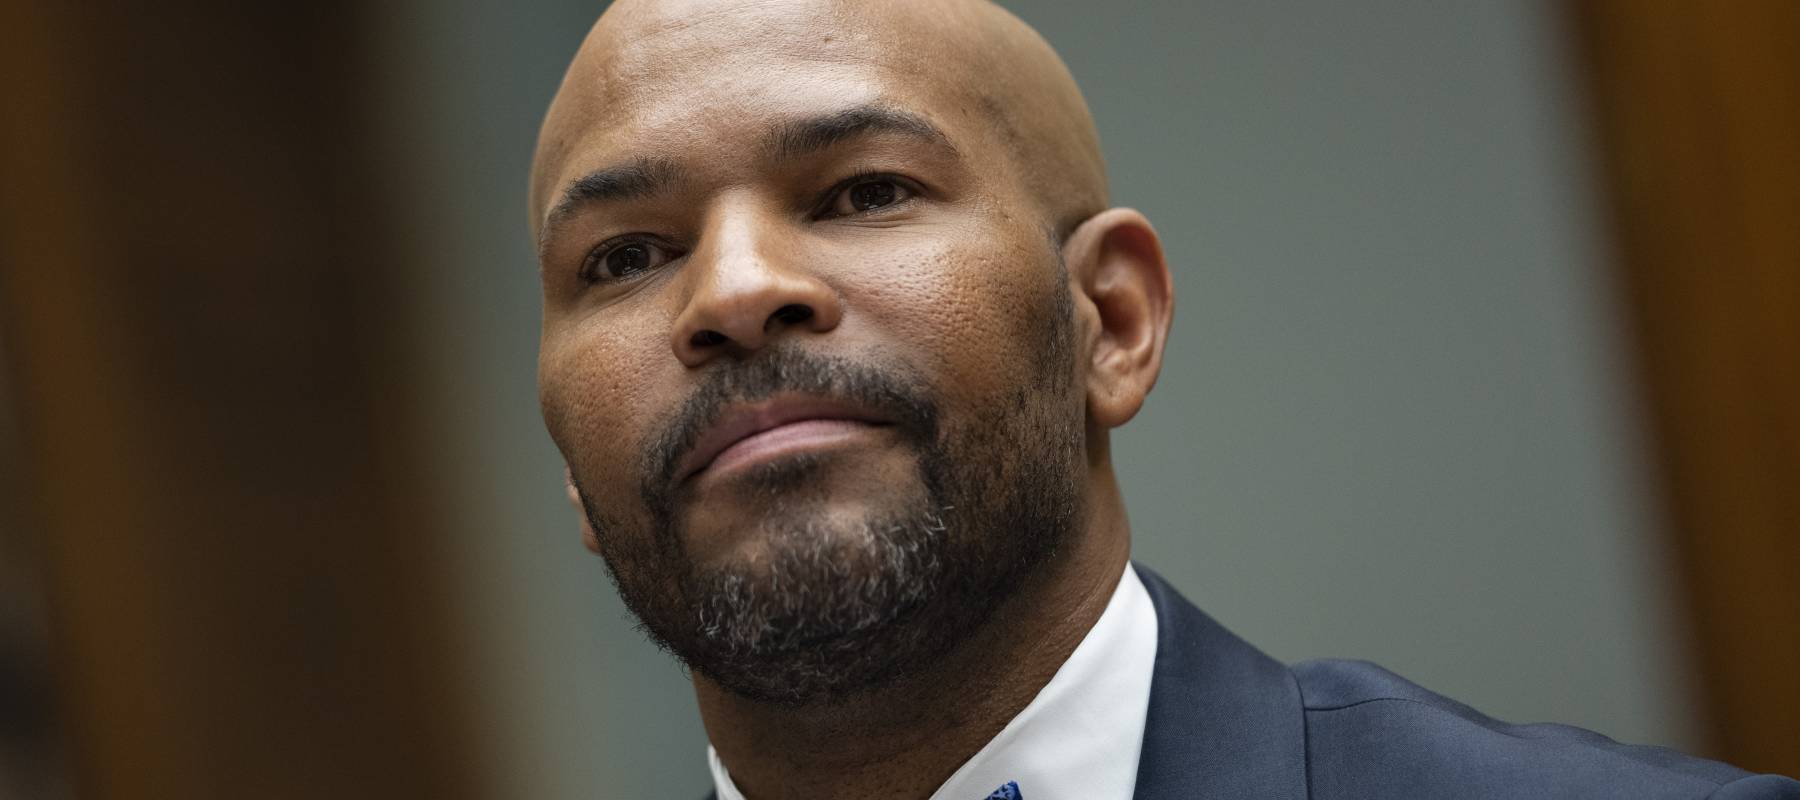 Former U.S. surgeon general Dr. Jerome Adams testifies during a hearing about coronavirus vaccine hesitancy on Capitol Hill in Washington, D.C., July 1, 2021.